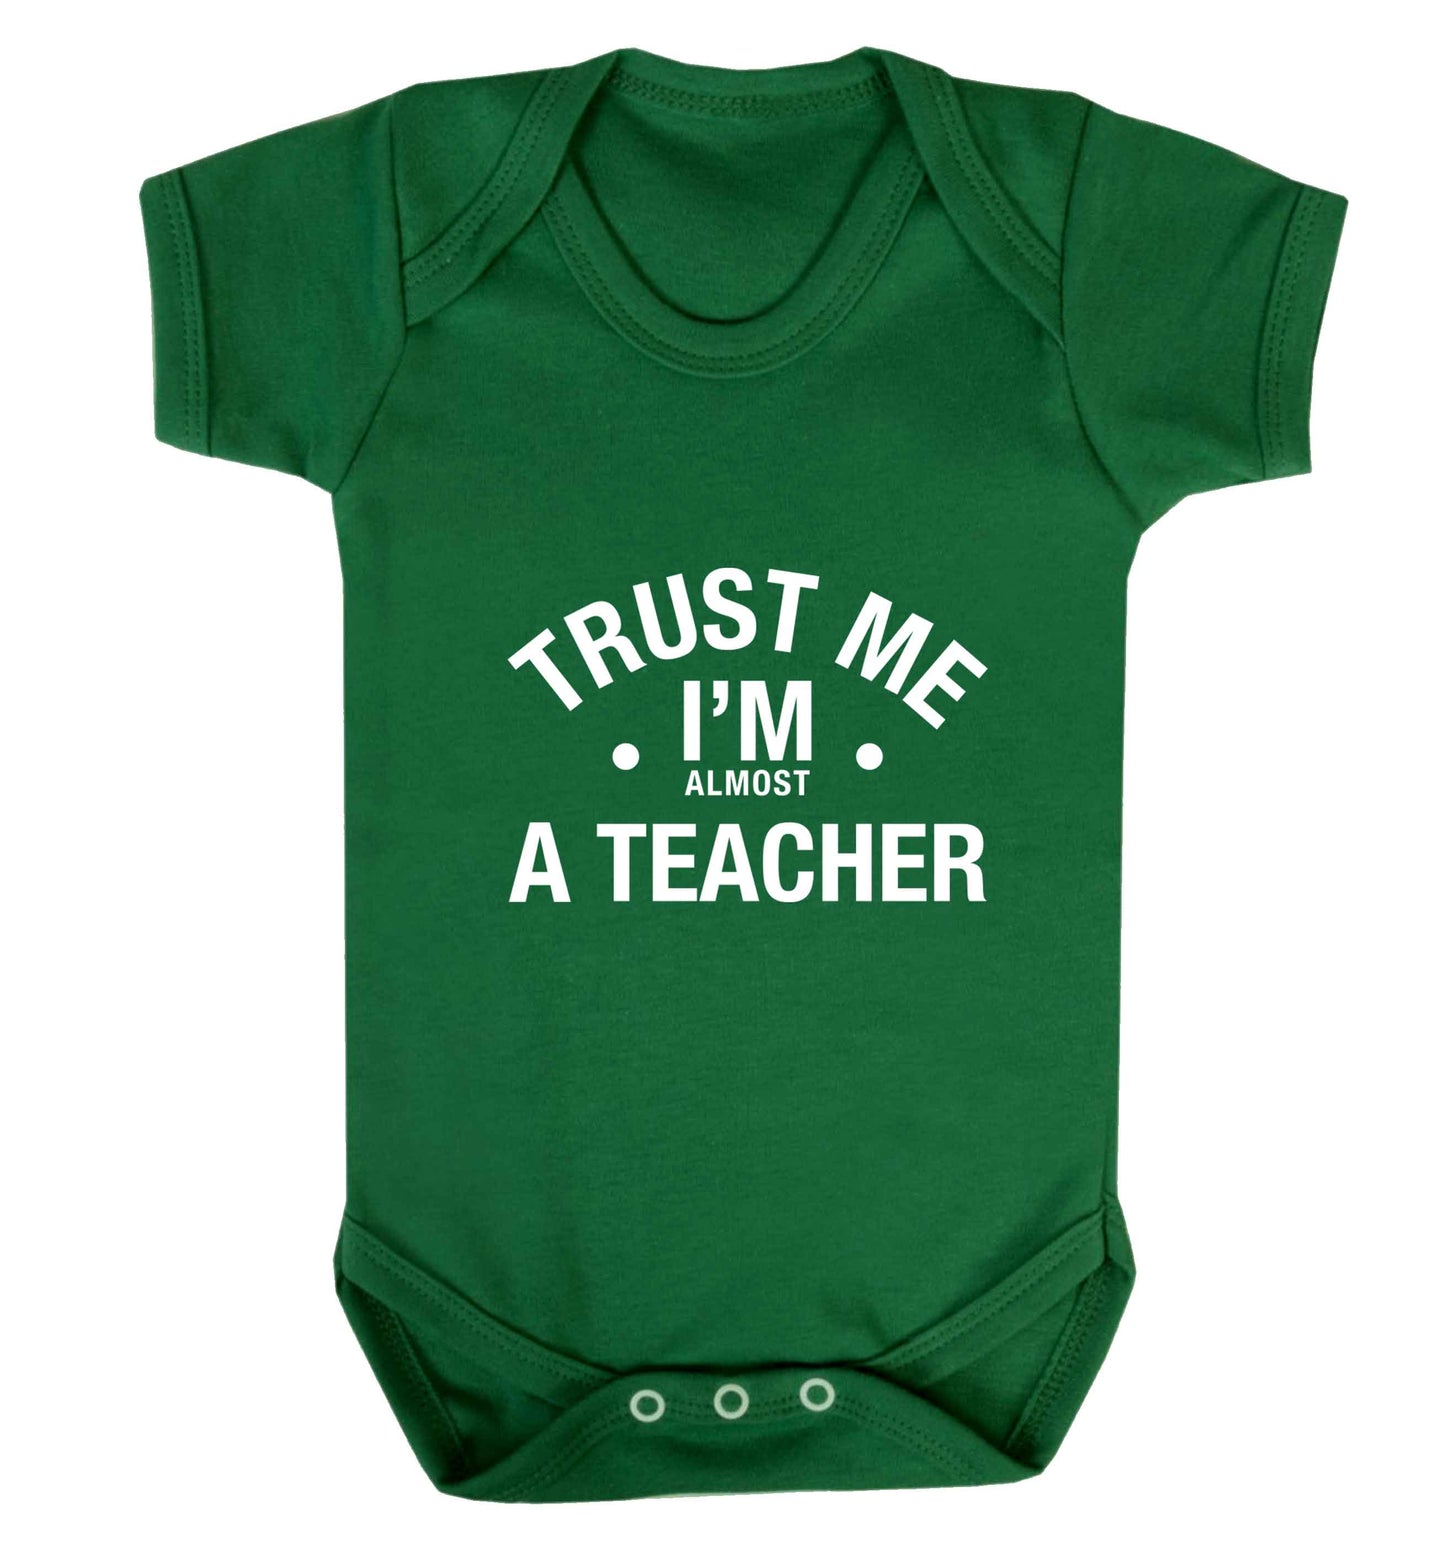 Trust me I'm almost a teacher baby vest green 18-24 months